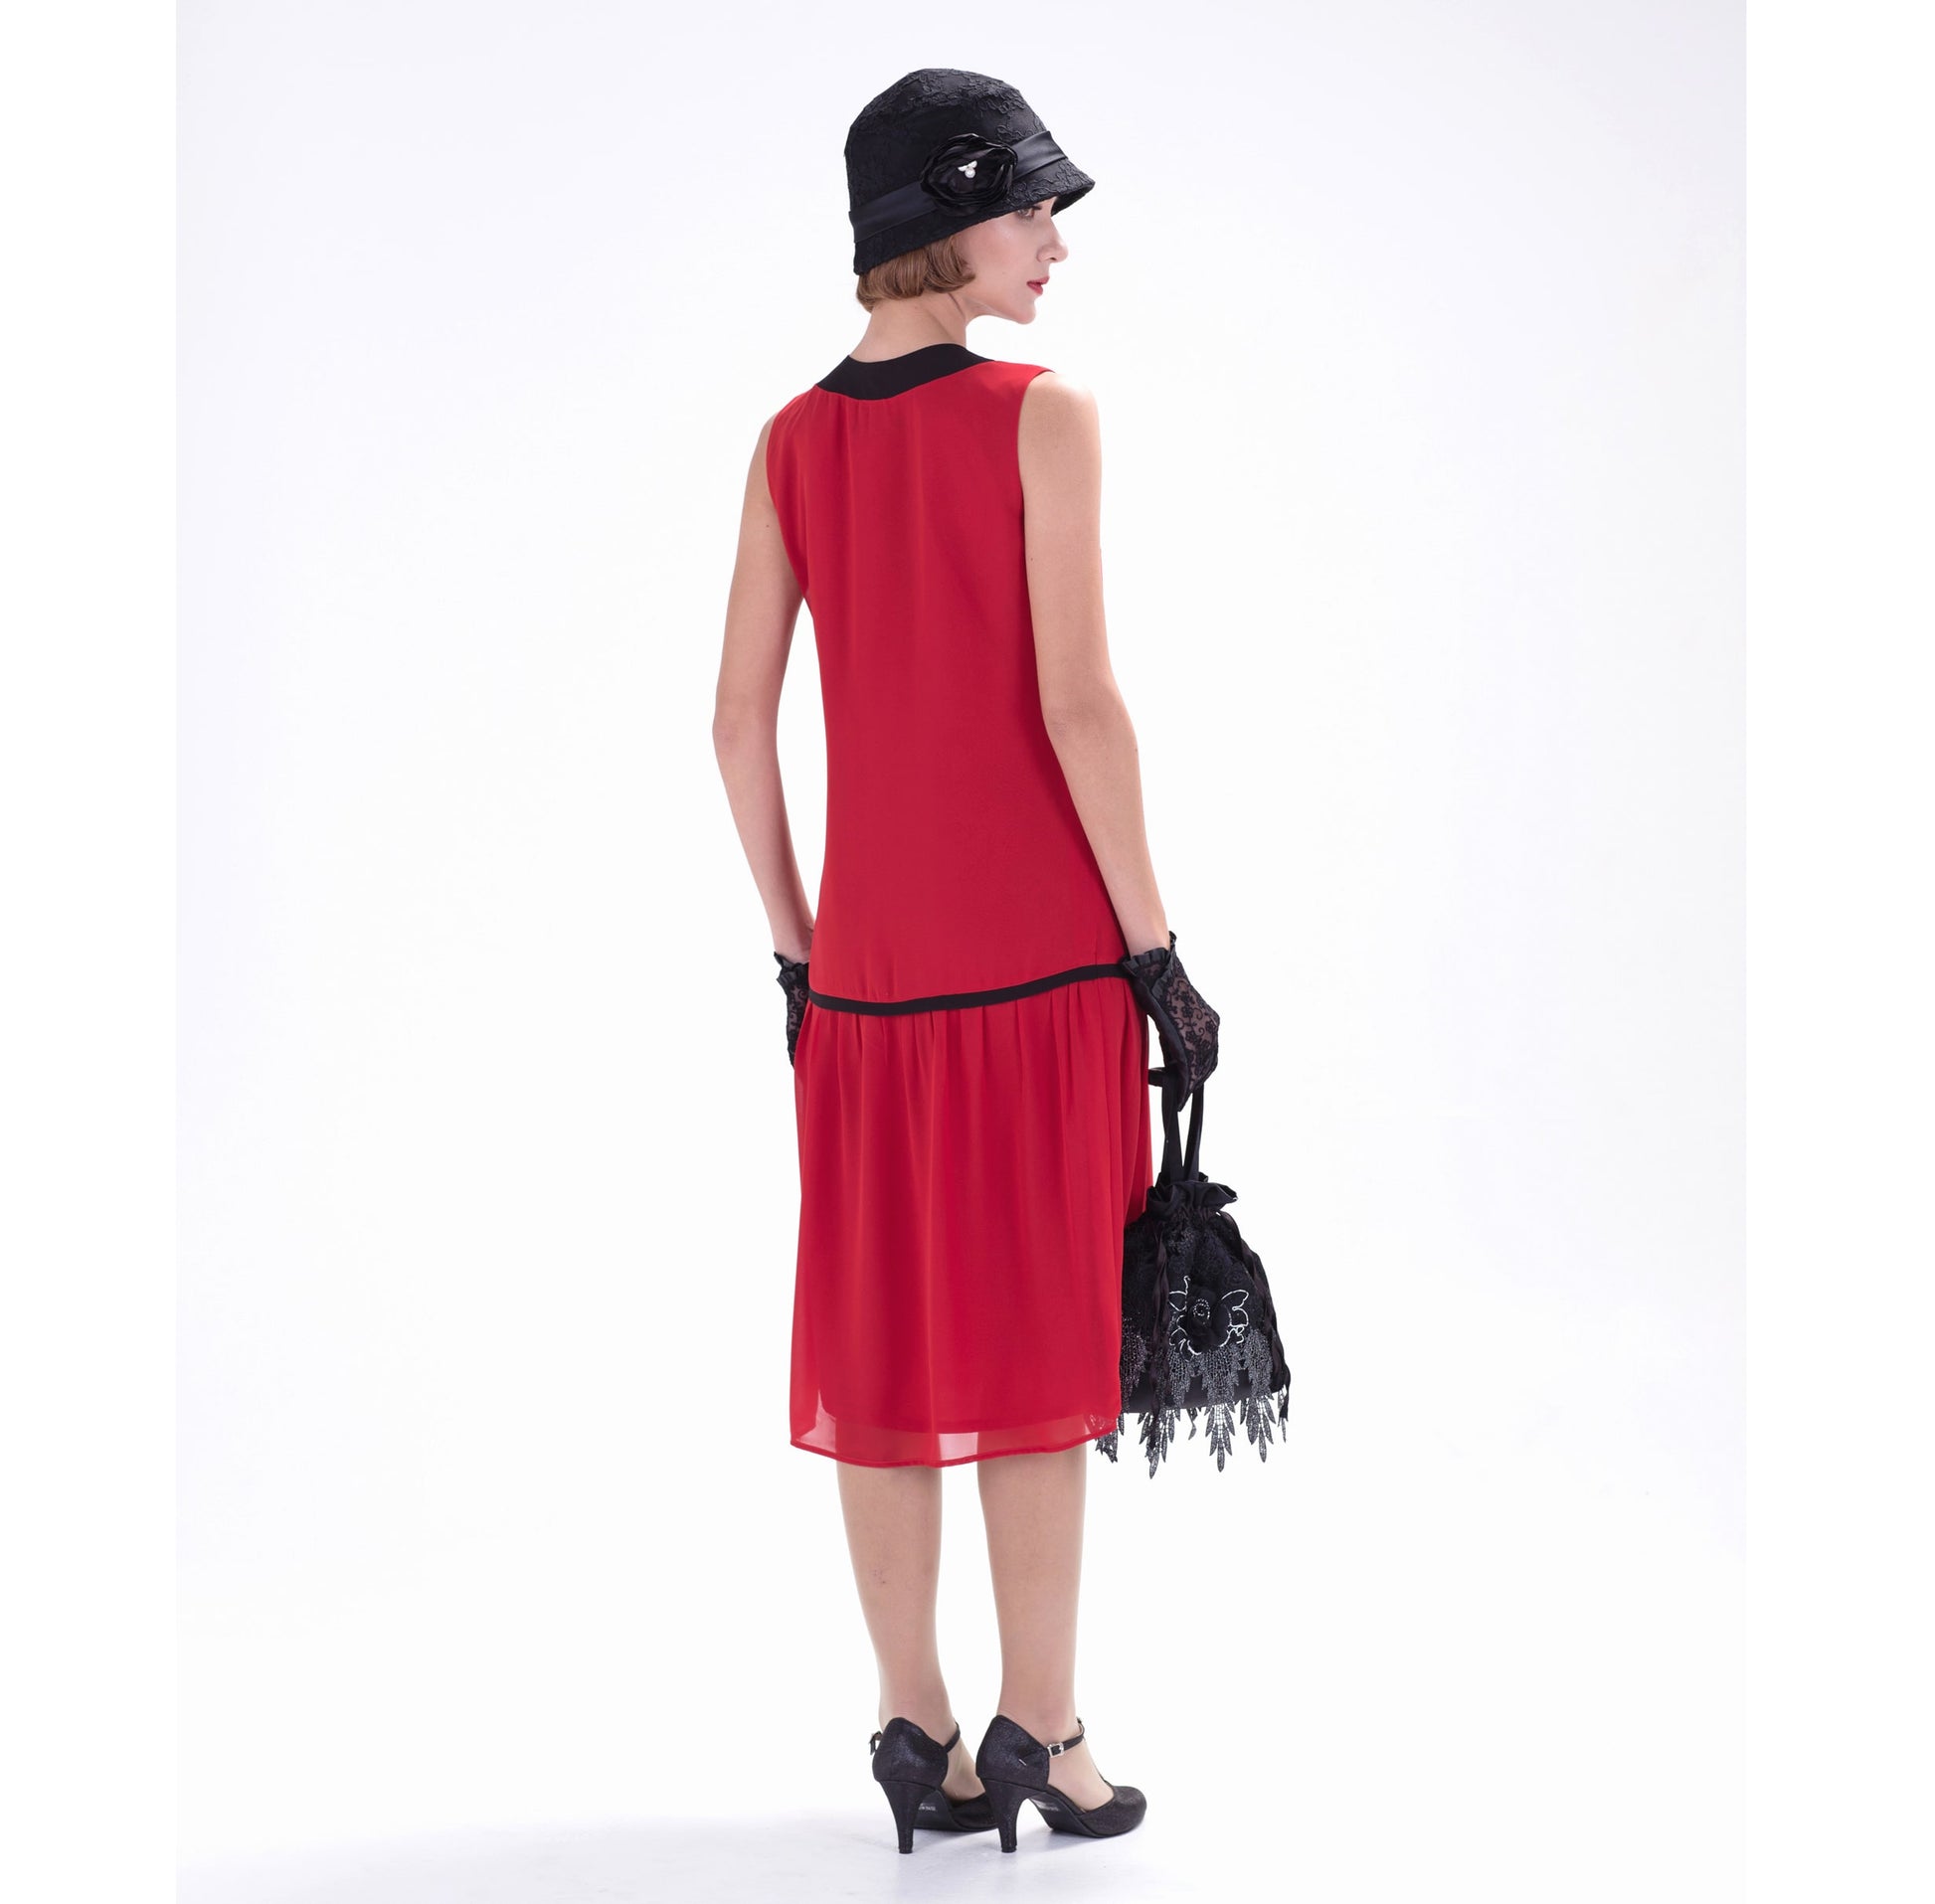 Red chiffon flapper dress with contrasting black details. This 1920s dress can be worn as a a Great Gatsby dress or Jazz Age party dress.